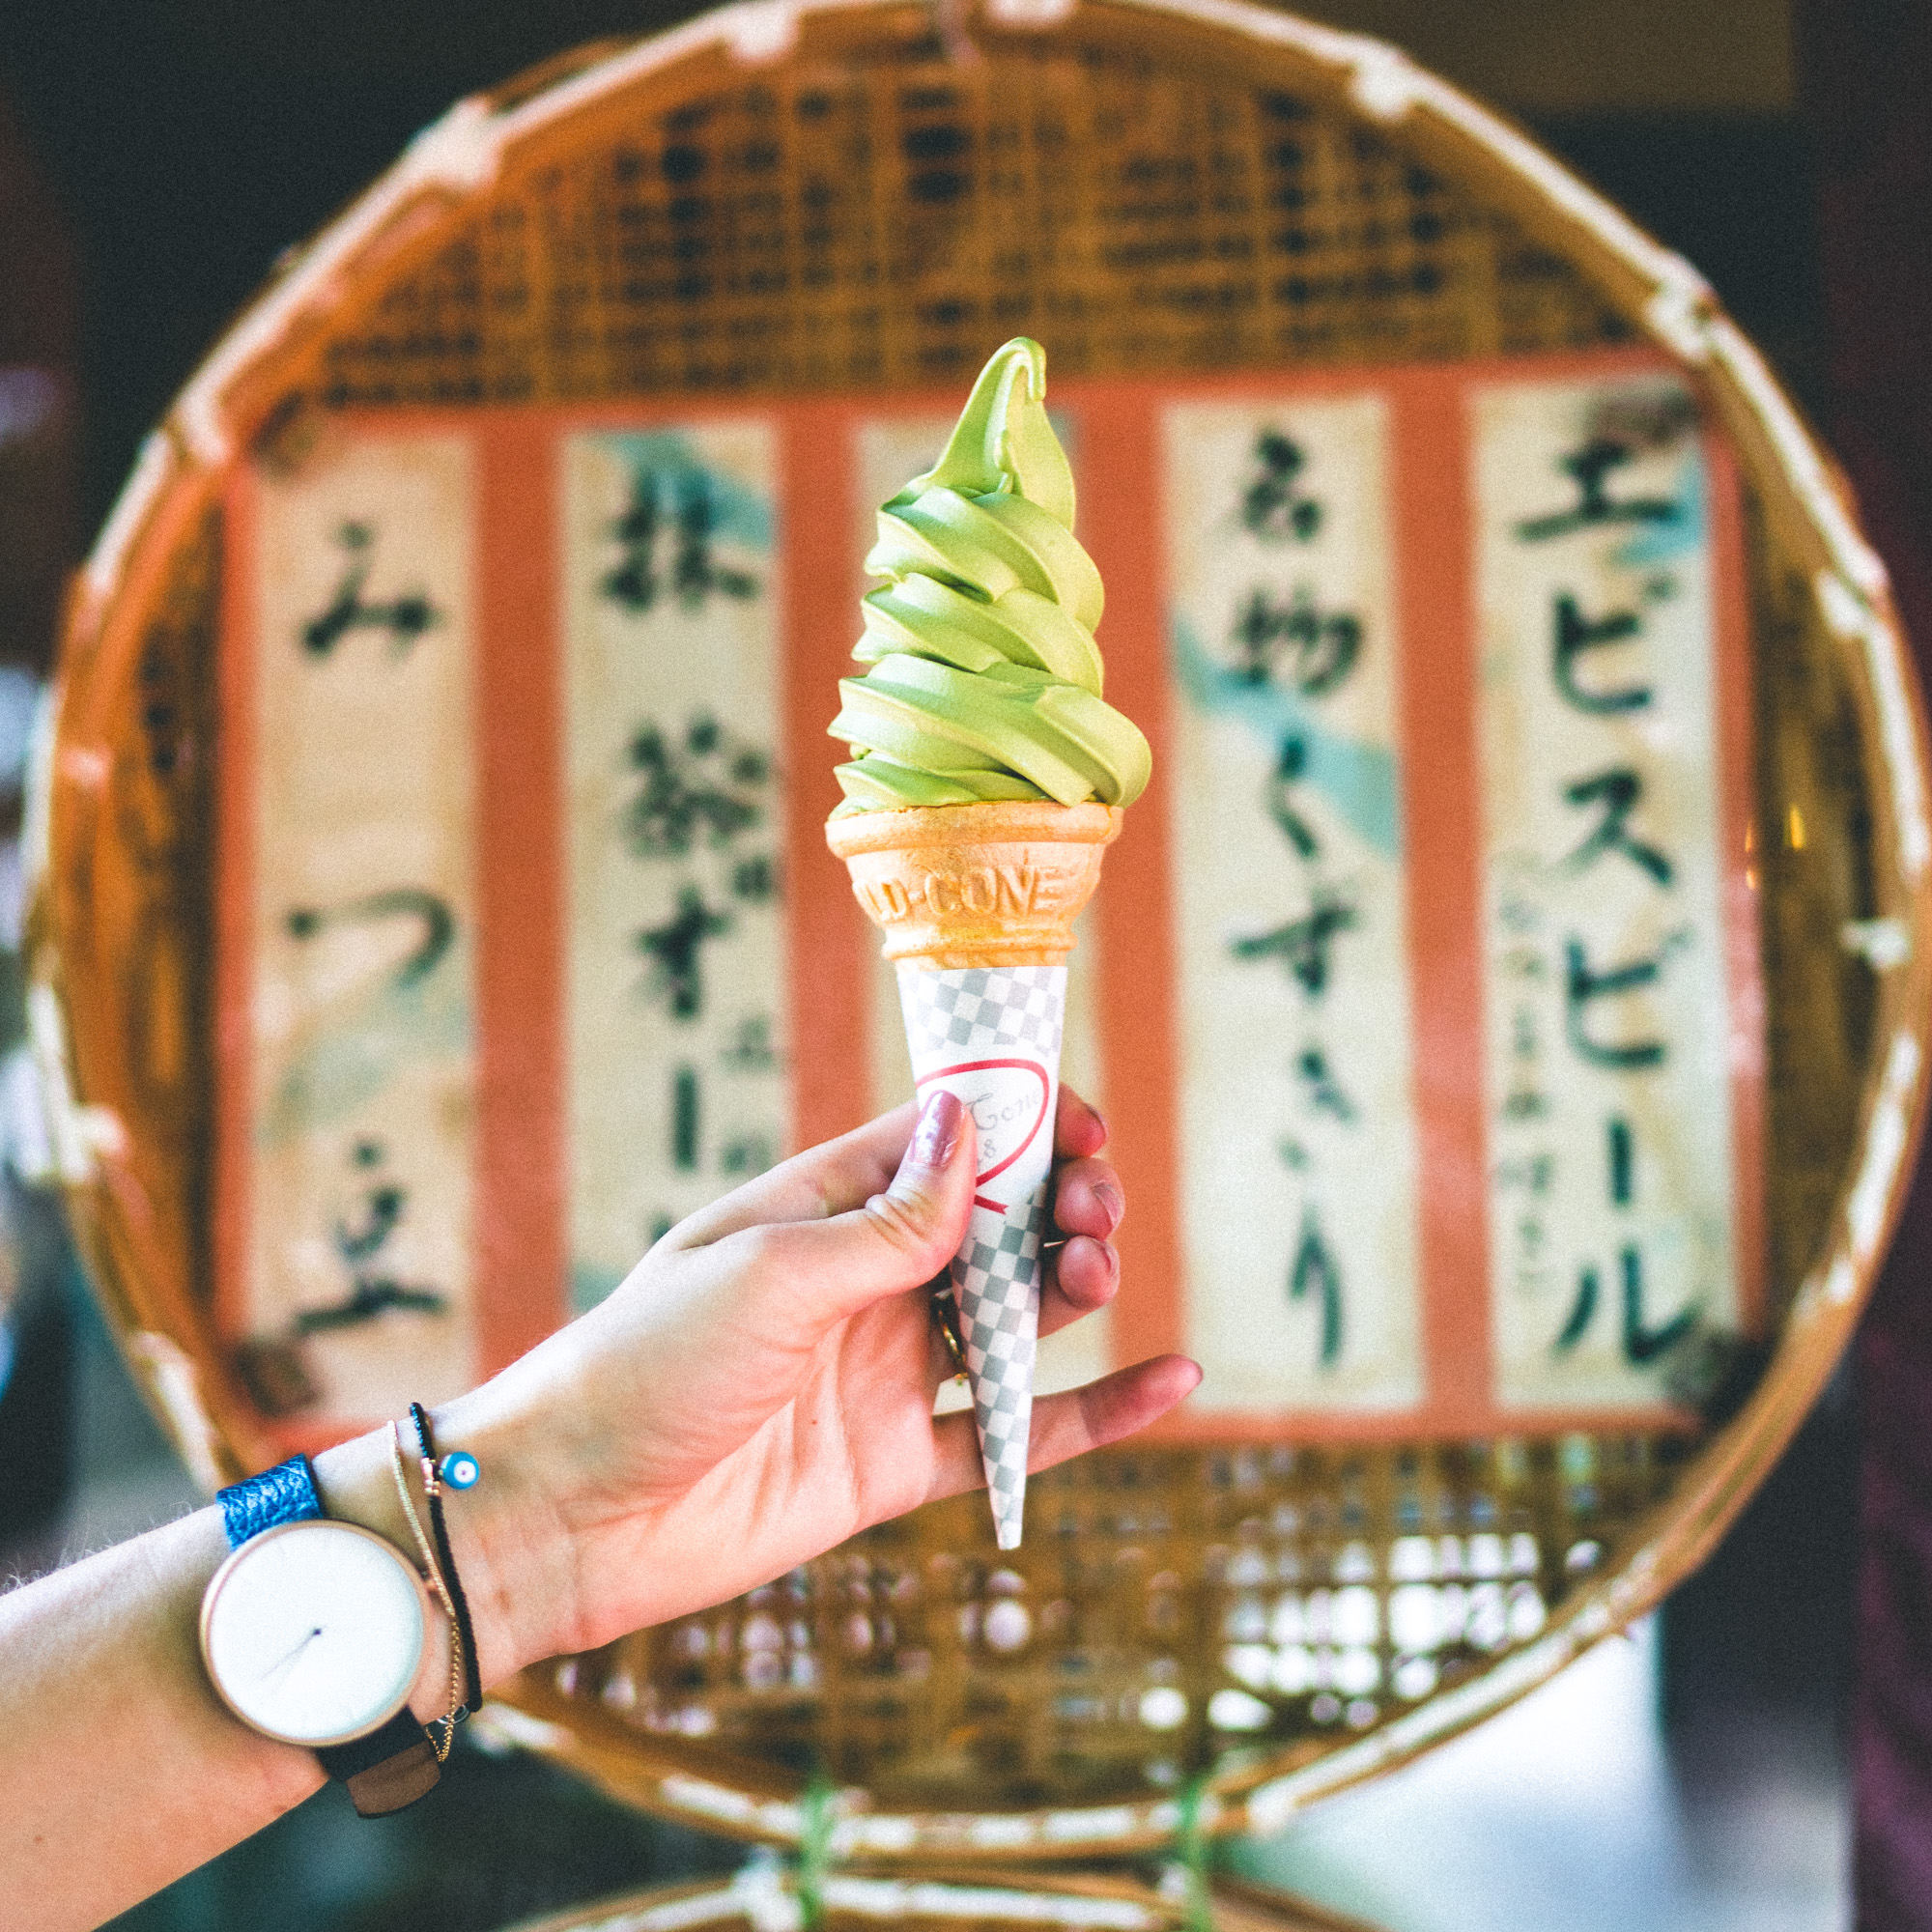 Matcha ice cream in Kyoto, Japan | 1 Day Guide Kyoto | Kyoto City Guide | Kyoto Travel Itinerary